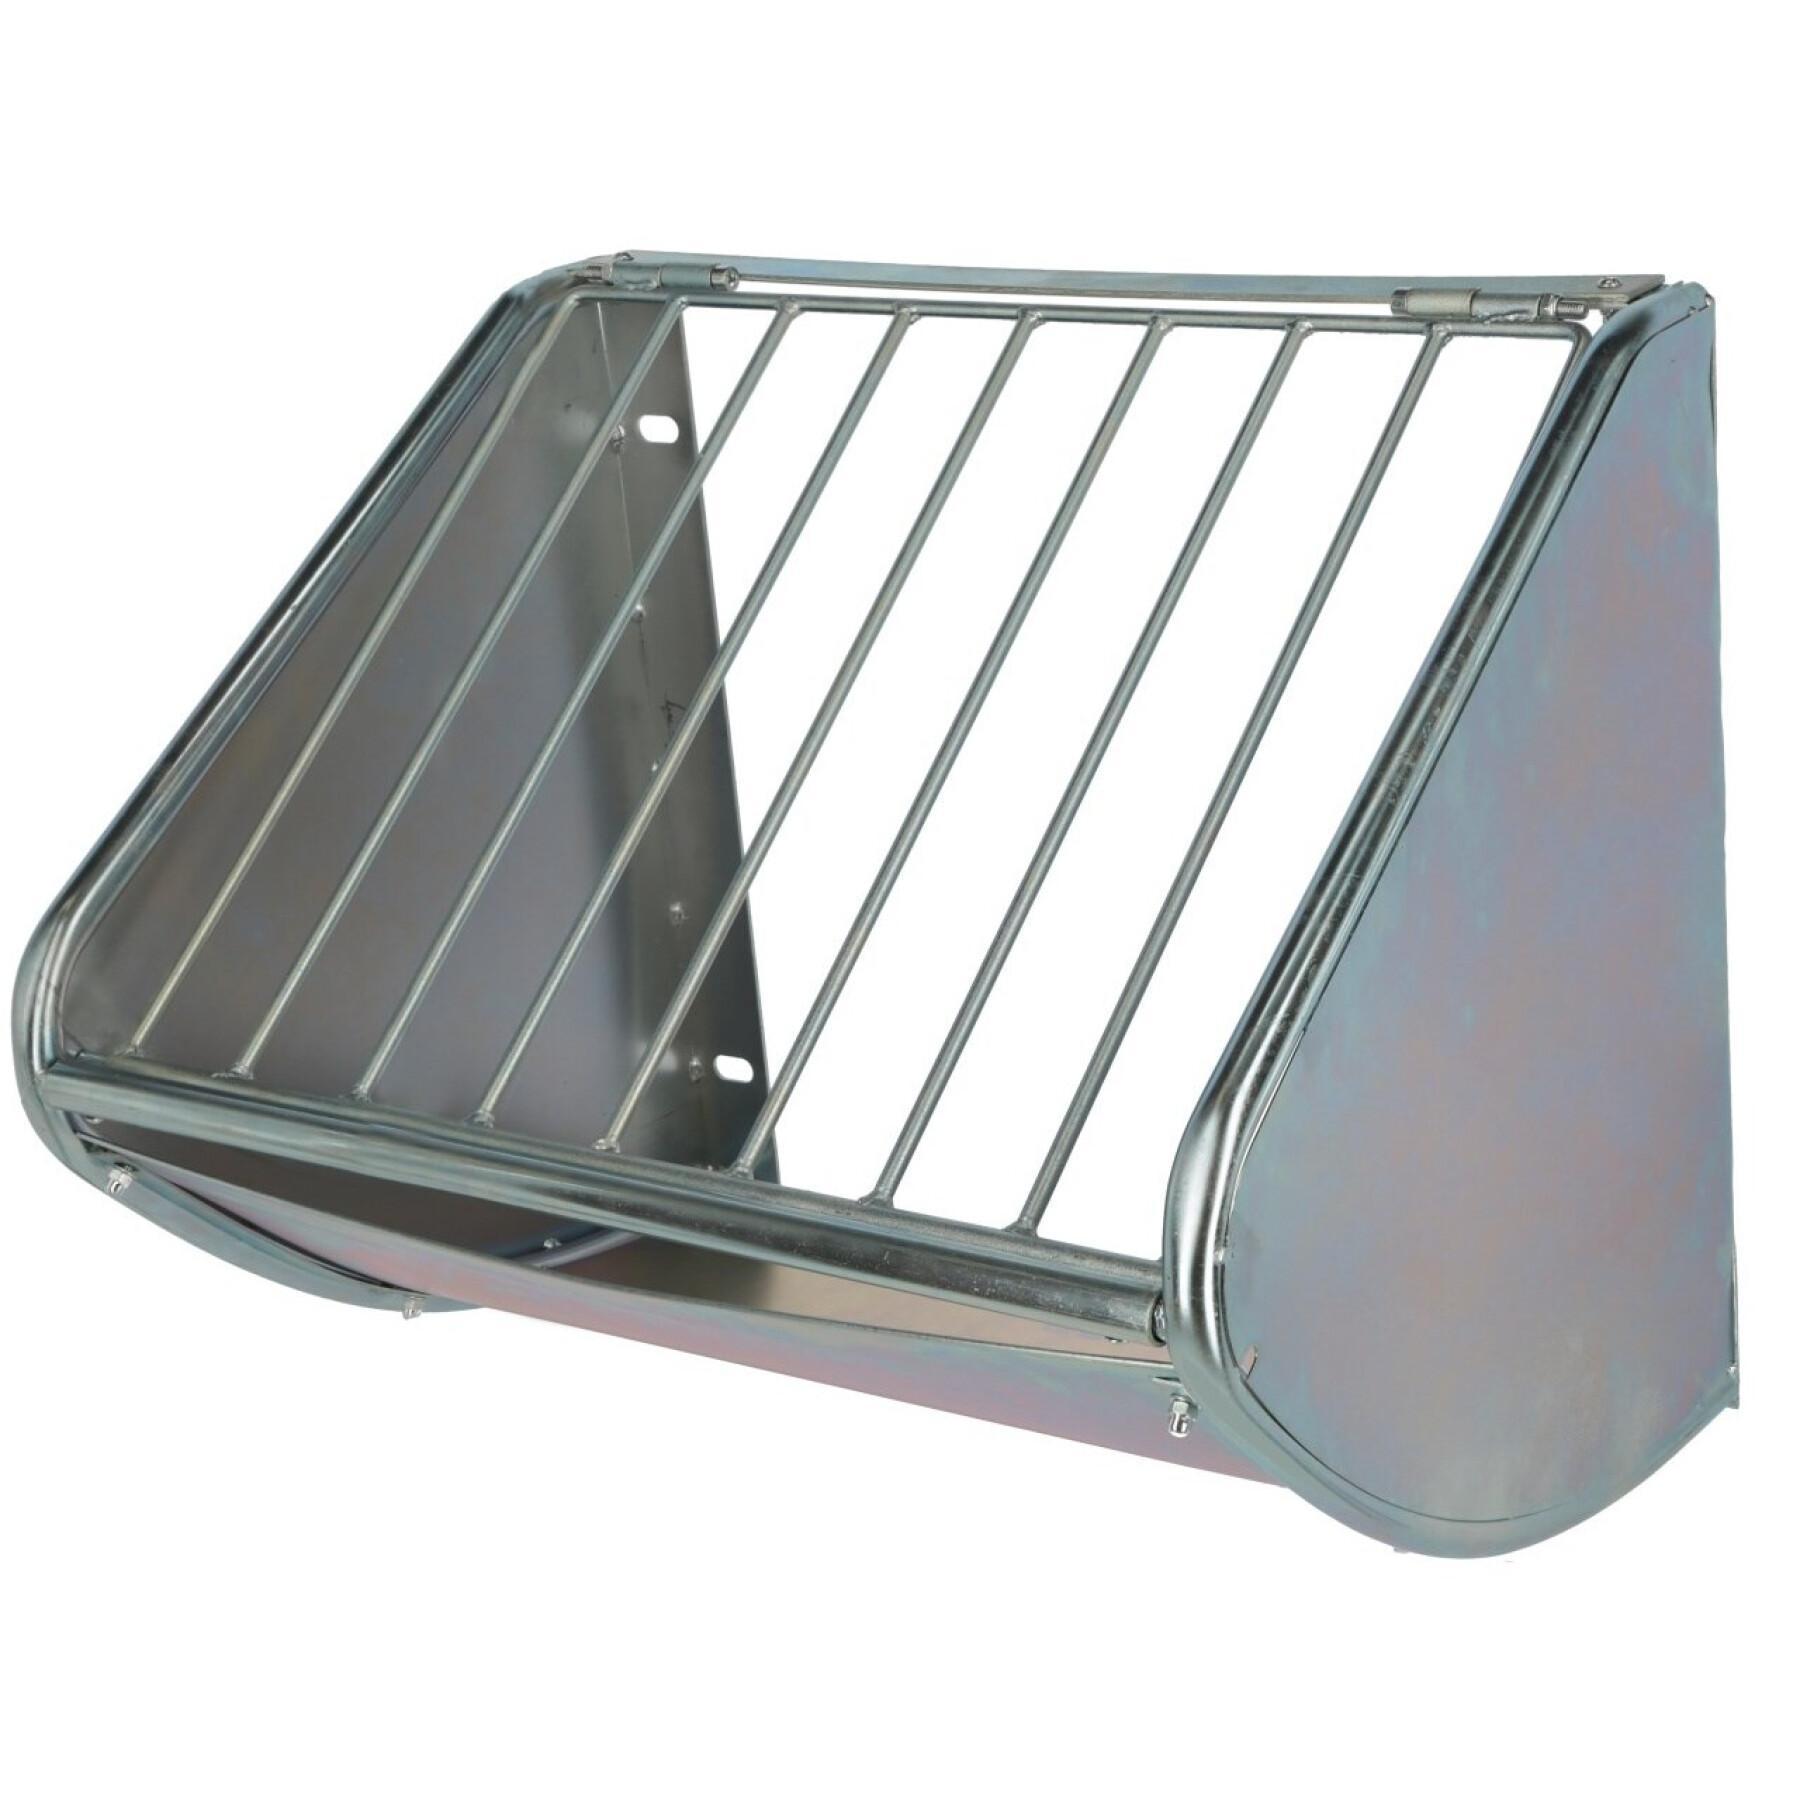 Zinc-plated spare grill Kerbl